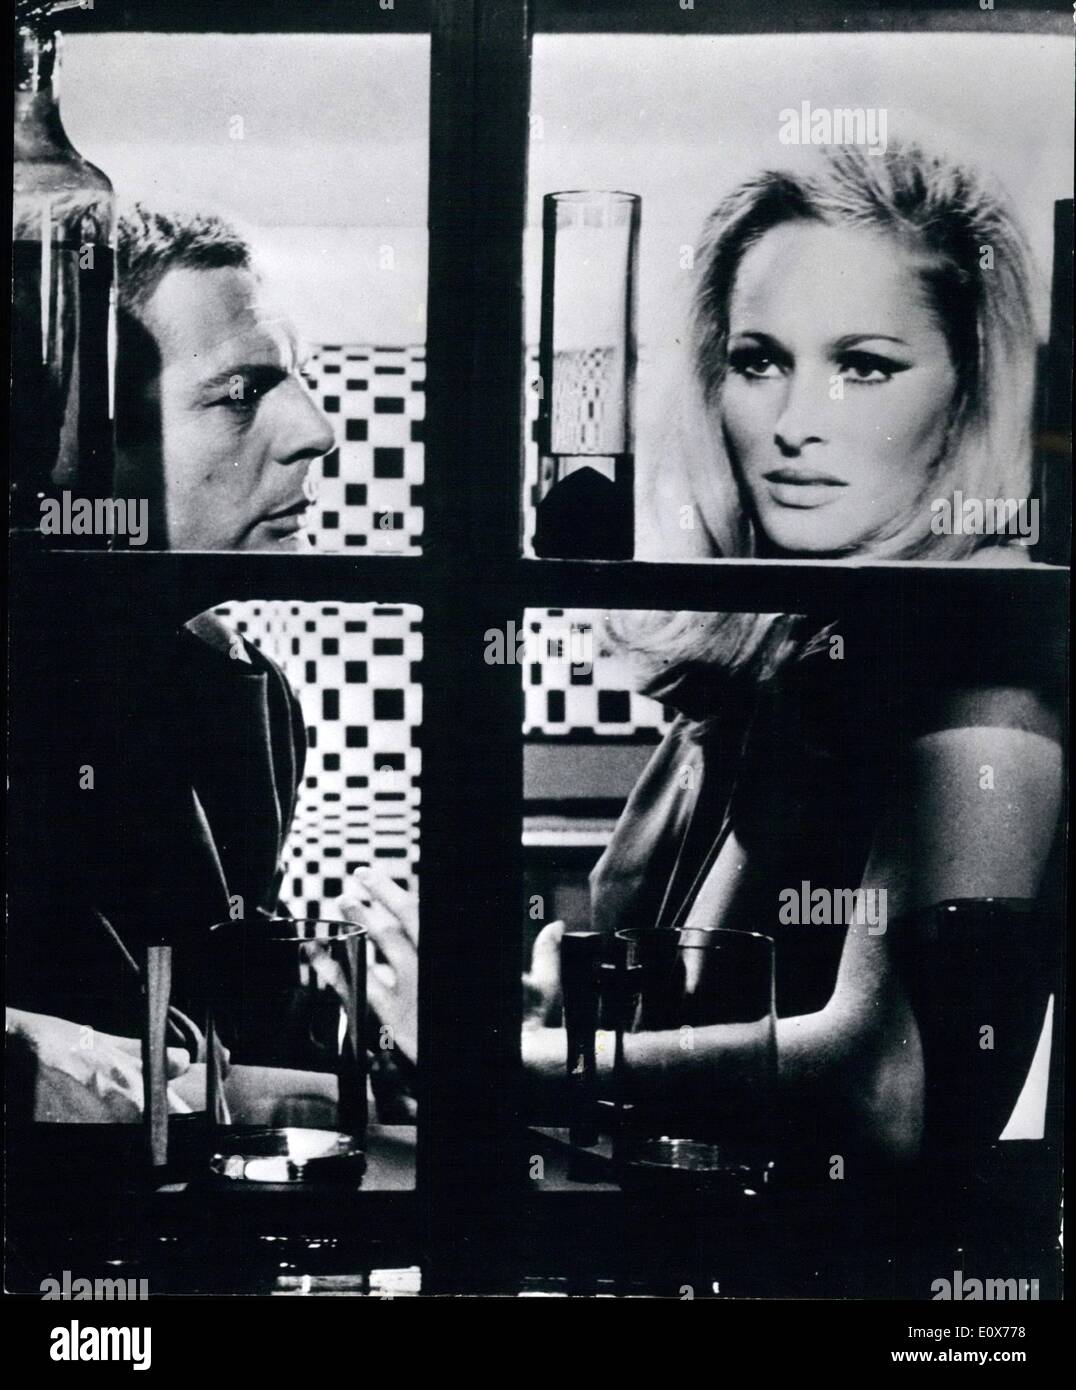 Jul. 07, 1965 - In one of the most exciting star combination of the year, Joseph Levine has teamed Marcello Mastroianni and Ursula Andress for ''The tenth victim''. a new comedy-thriller to be filmed on locations in Rome and New York. In the film based on Robert Sheck ley's popular science finction novel, Mastroianni finds himself in hot pursuit by a murder-minded Miss Andress, out to earn her diploma in legal homicide from the central world government, circa 2000 A.D. When she finds her target is the lovable latin with his own ''license to kil'' the romantic runabout begins Stock Photo